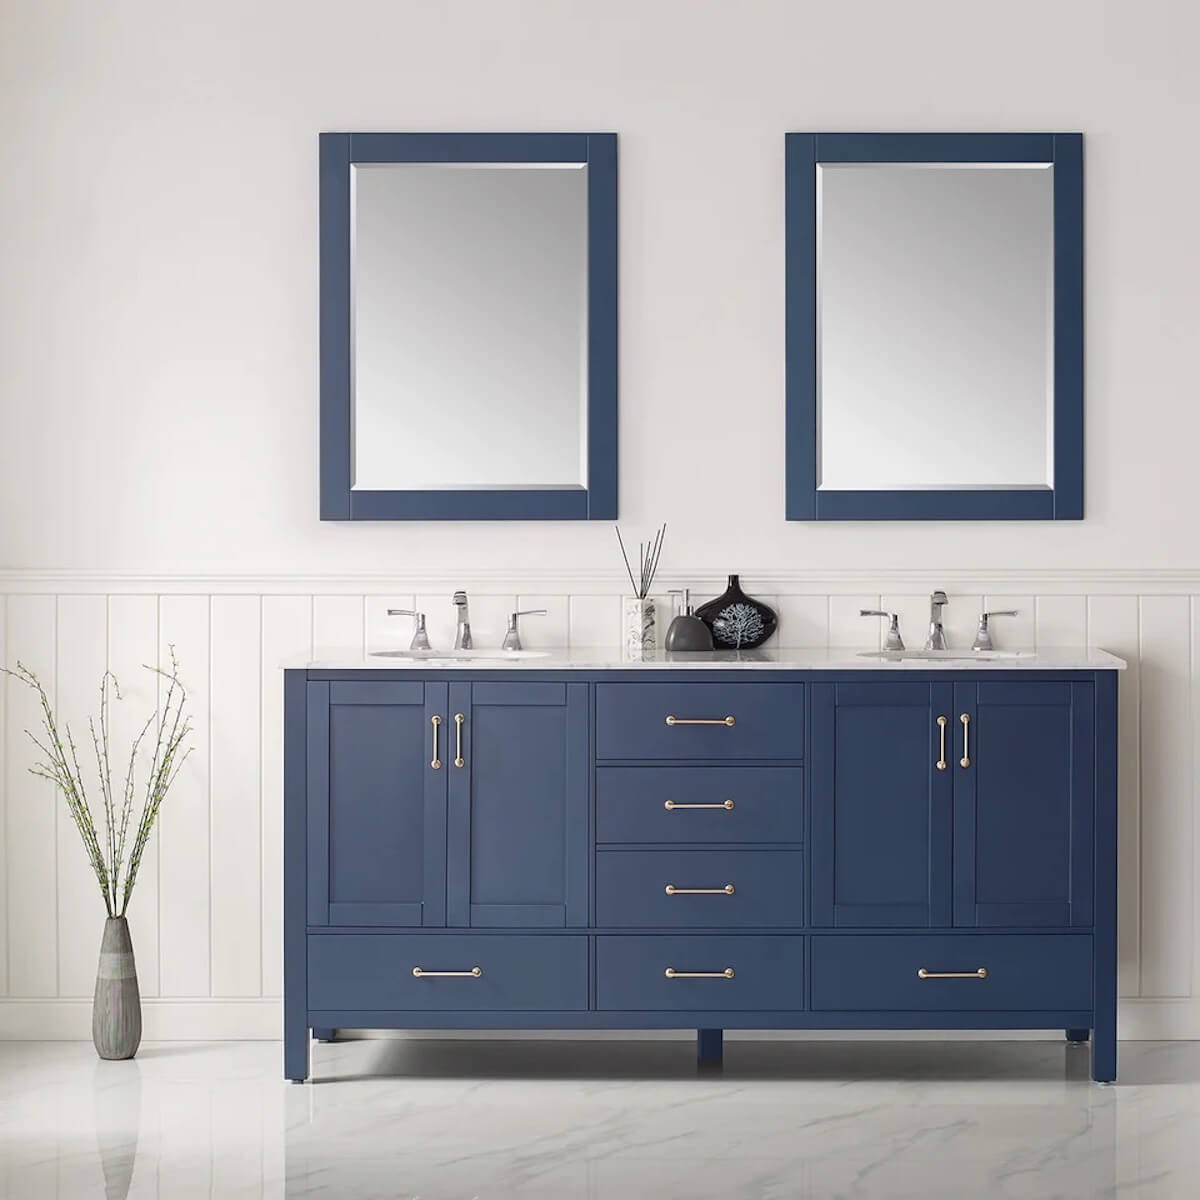 Vinnova 72” Gela Royal Blue Freestanding Double Vanity with Carrara White Marble Countertop With Mirror in Bathroom 723072-RB-CA